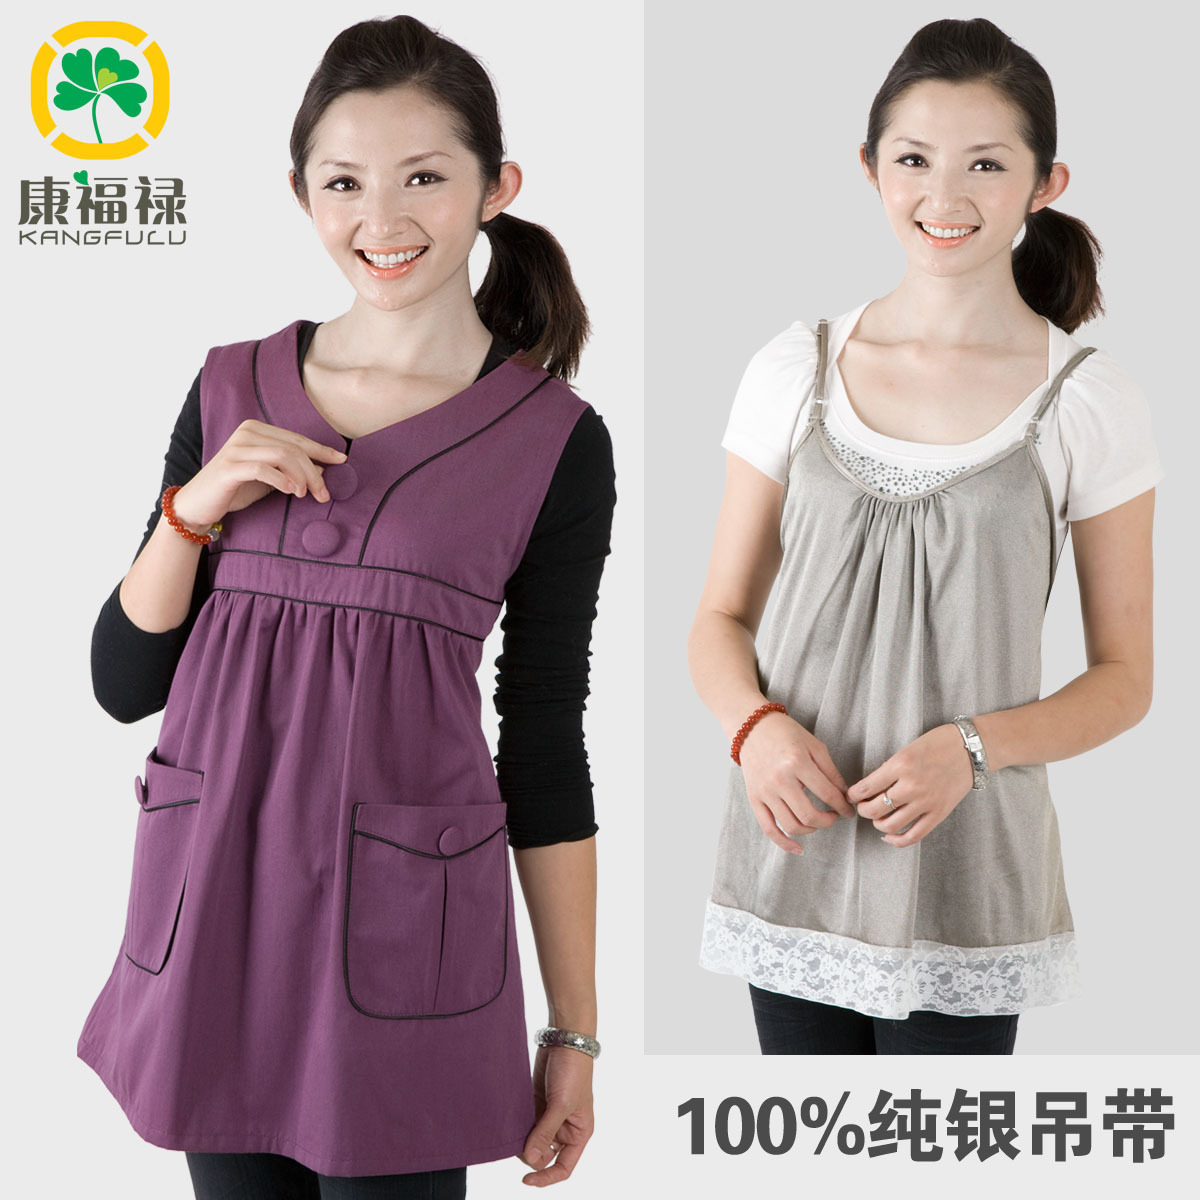 Double radiation-resistant silver fiber radiation-resistant maternity clothing 908cy2 full